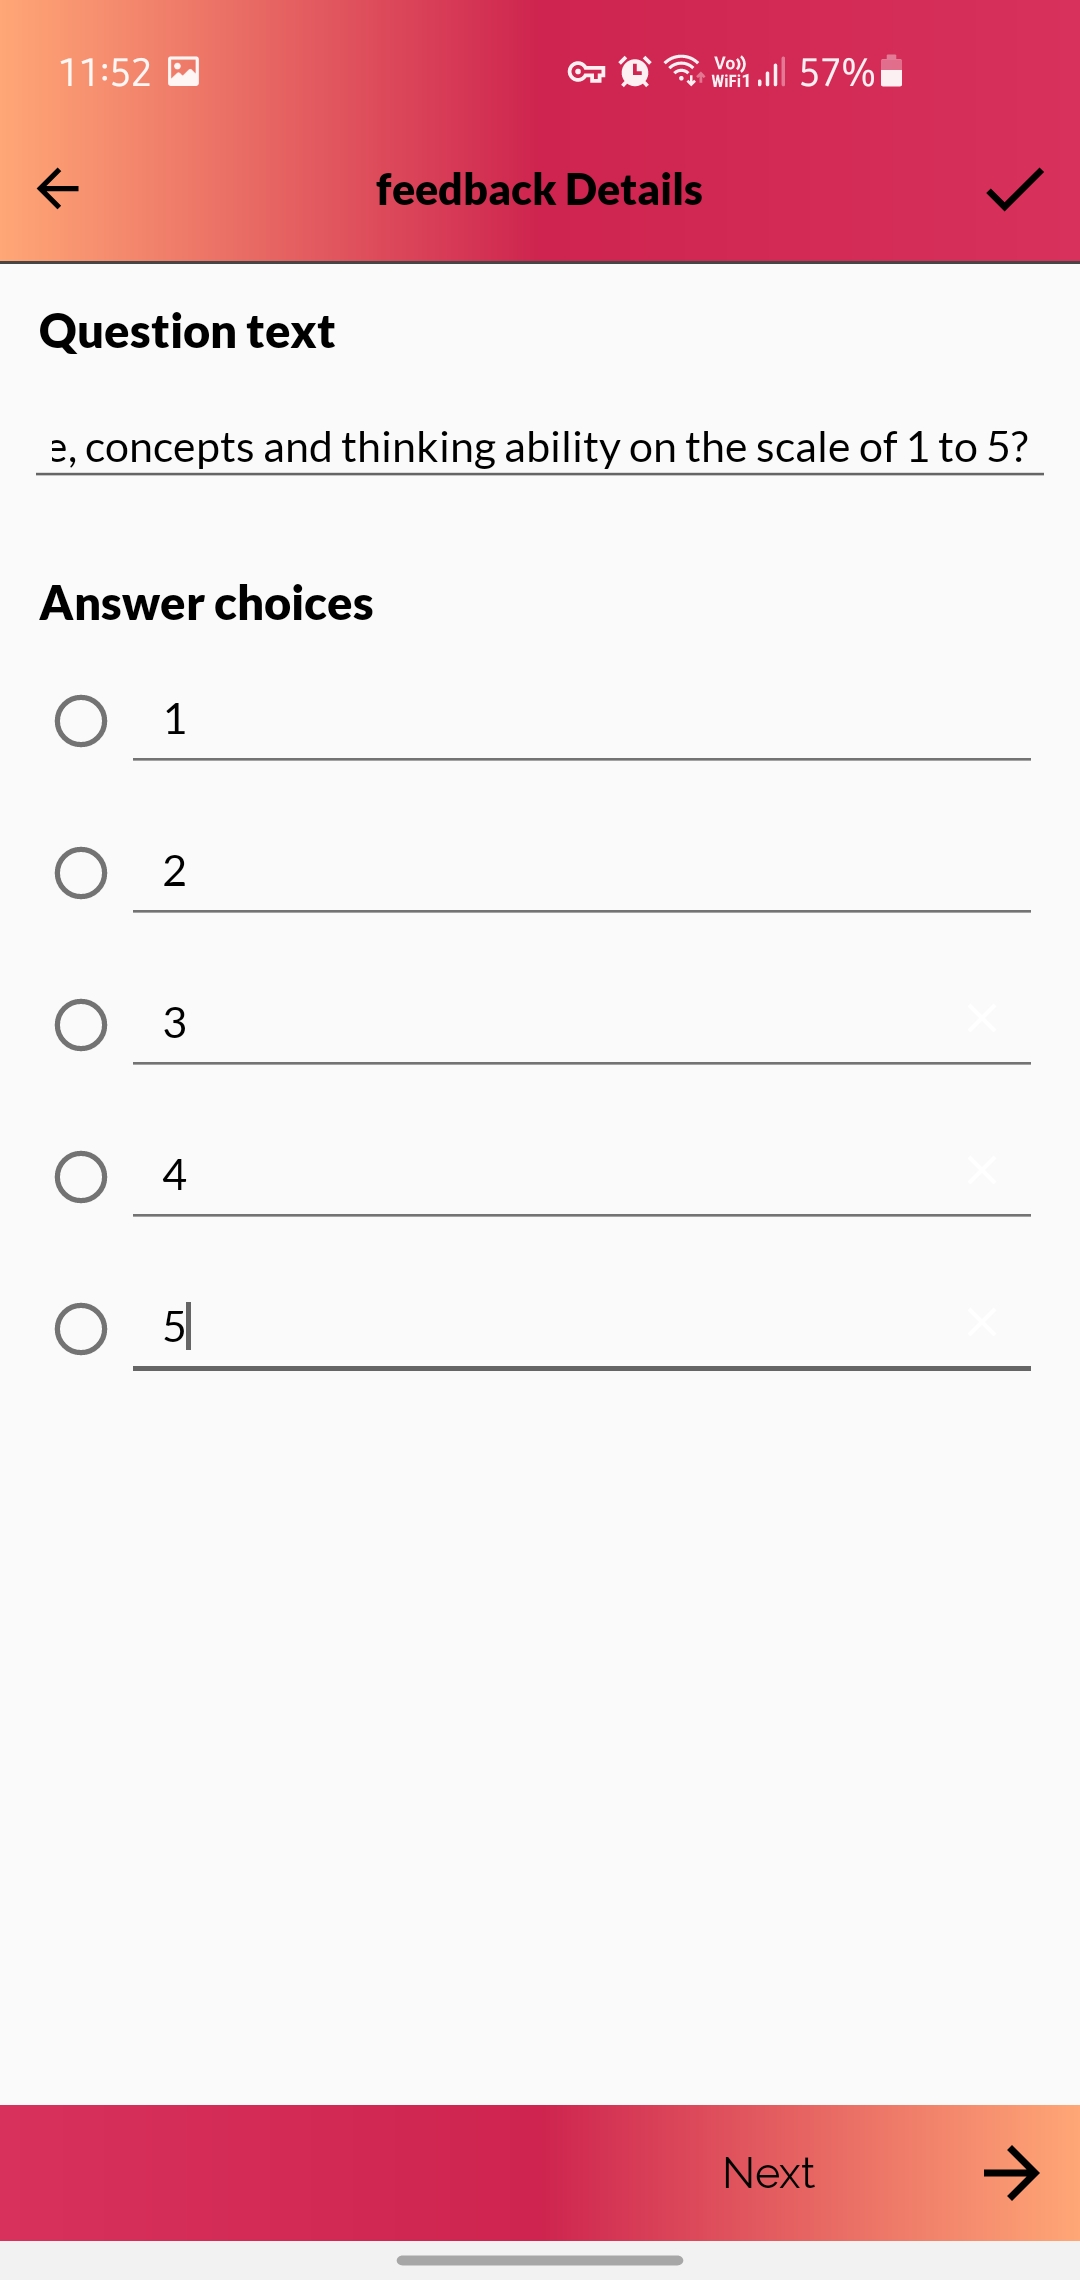 Add questions as required and tap on tick mark on top right corner to successfully save all the questions added to the Feedback Form.